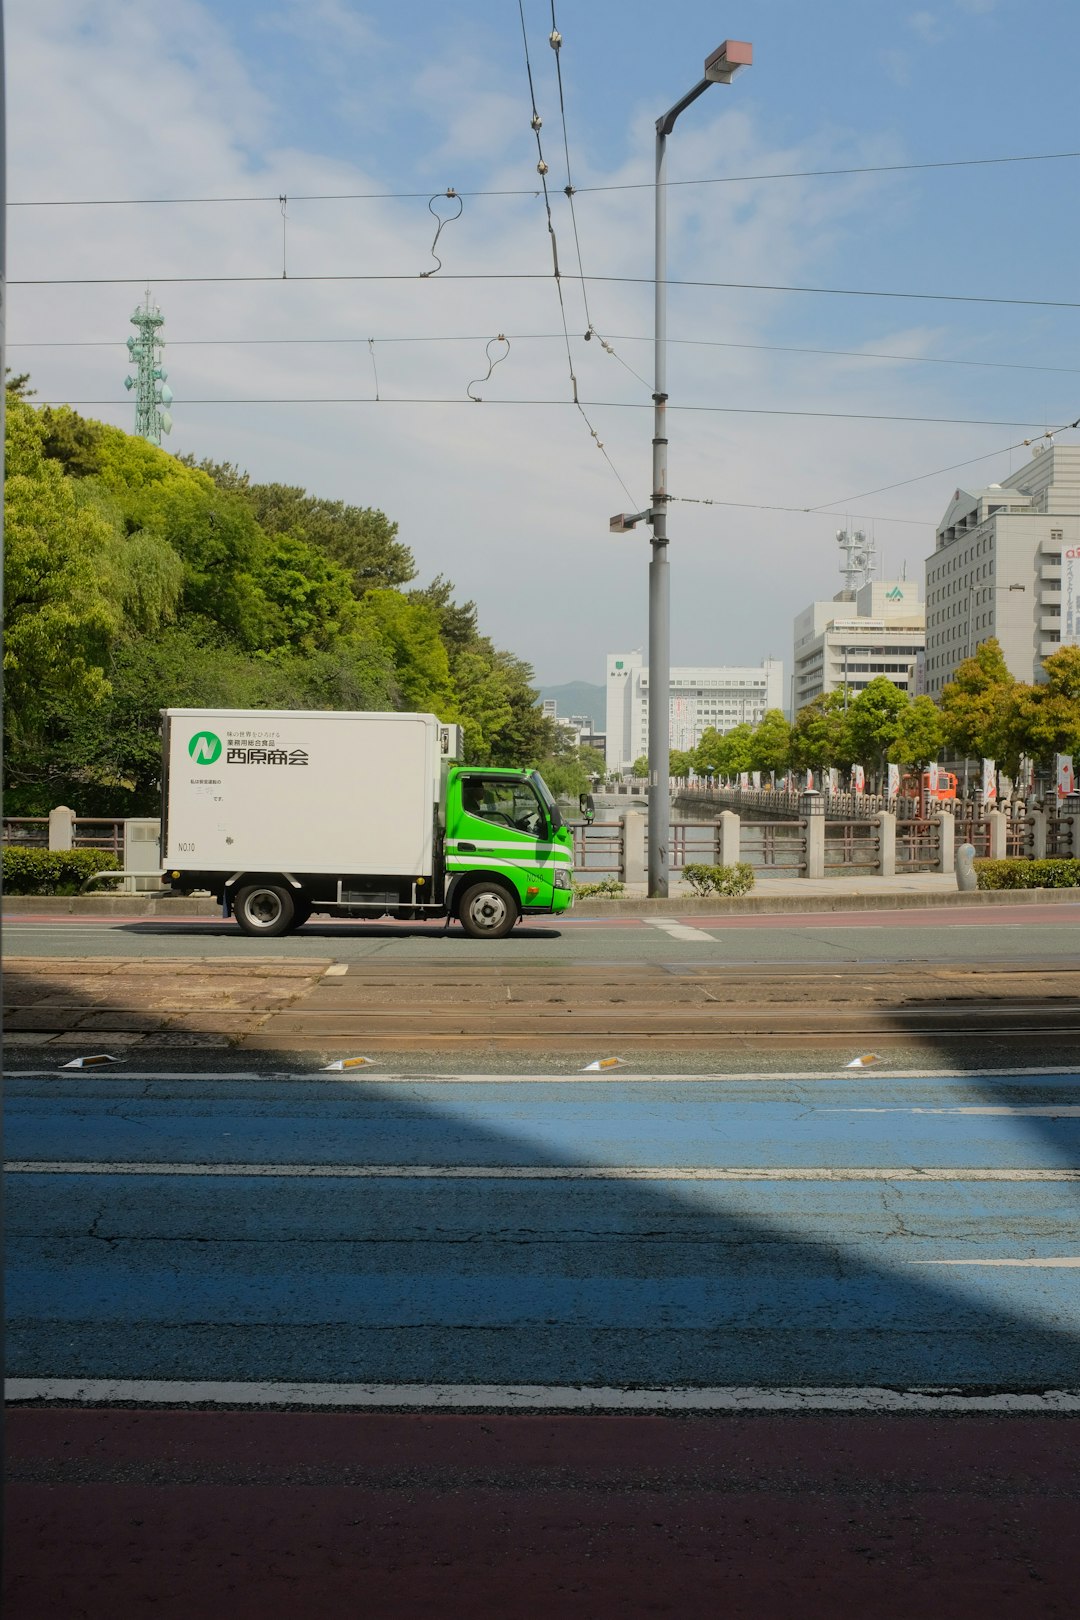 white and green truck on road during daytime